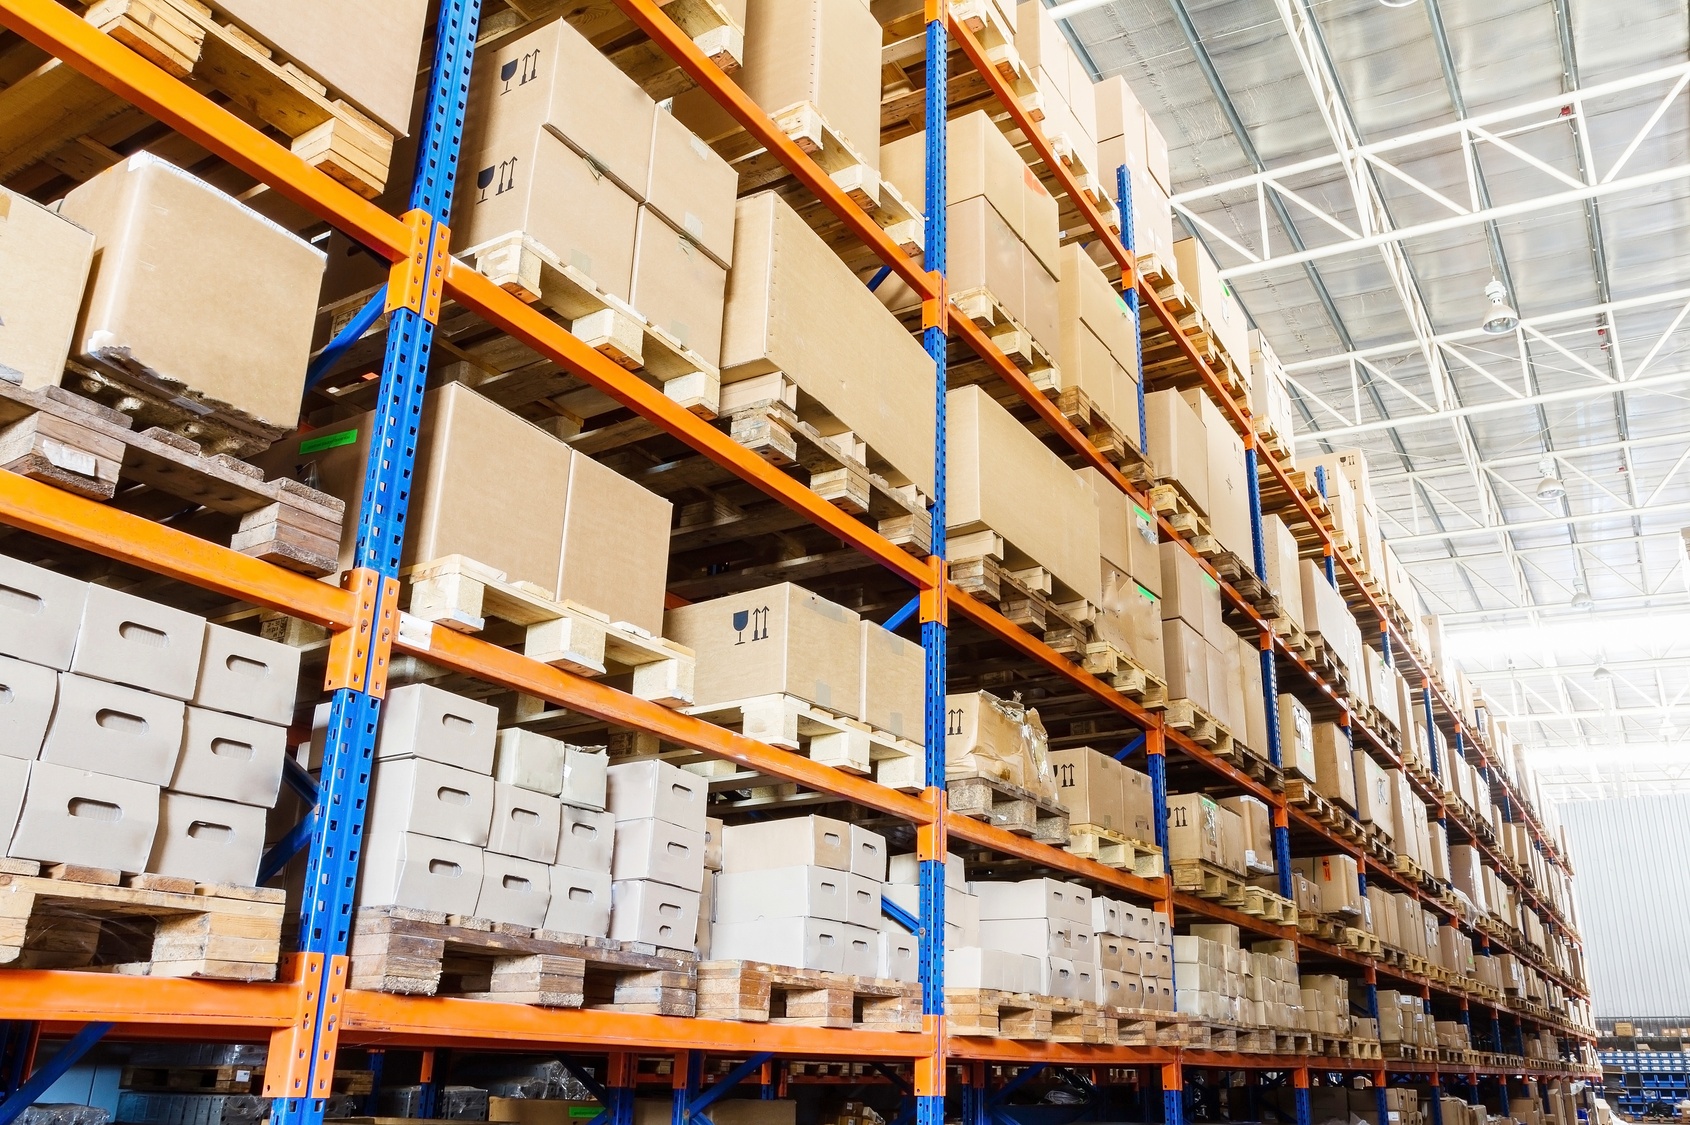 Wholesale and Distribution Industry: Use the Cloud to Compete